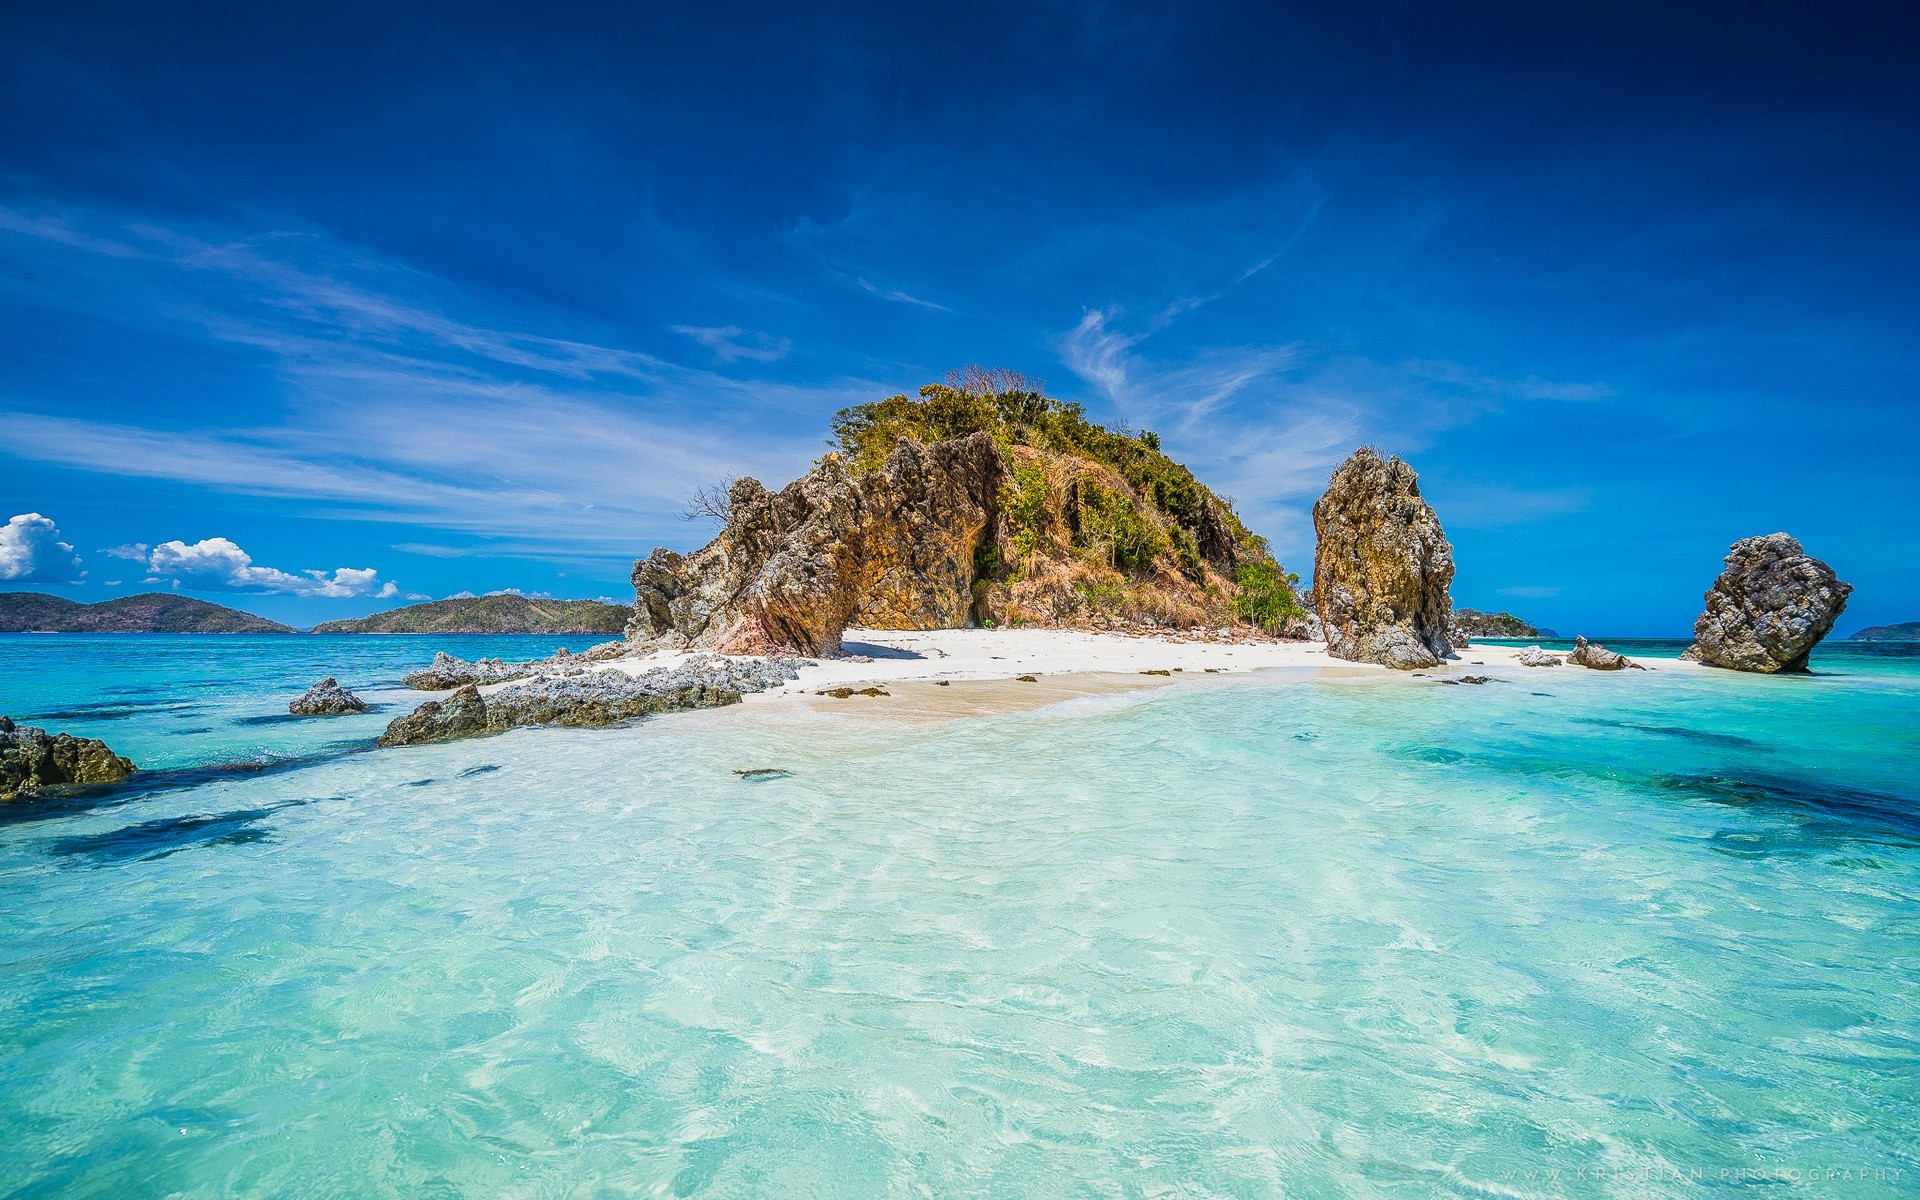 General 1920x1200 nature landscape island beach Philippines tropical rocks sand turquoise sea water summer mountains clouds Asia